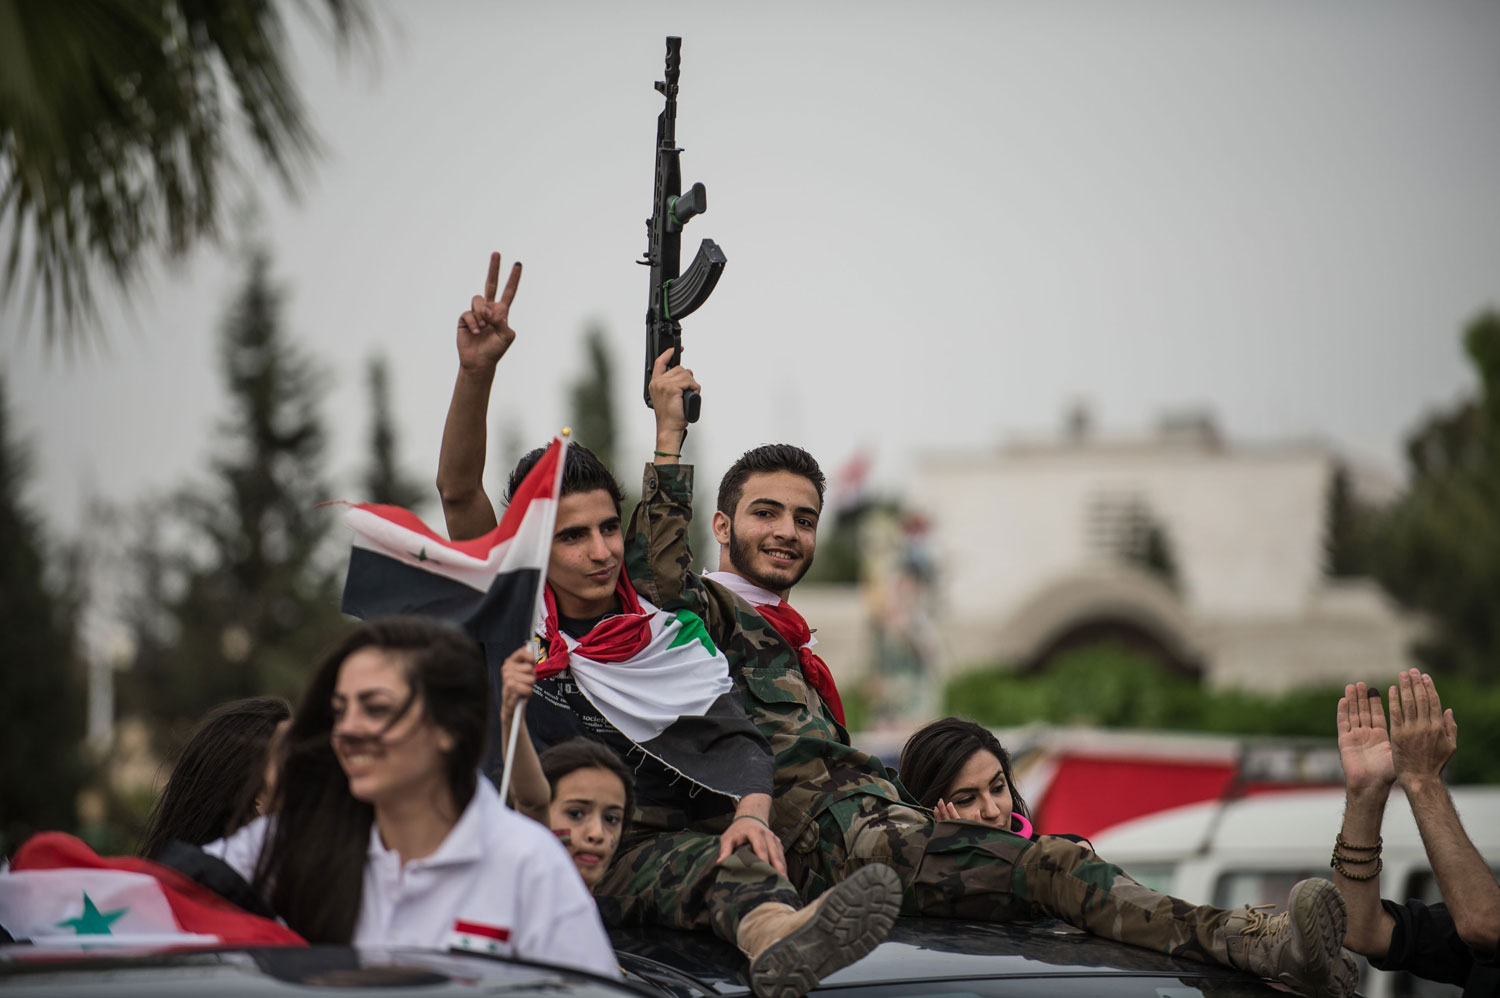 Syrian supporters of presidential candidate Bashar al-Assad attend a march in Damascus on June 3, 2014.